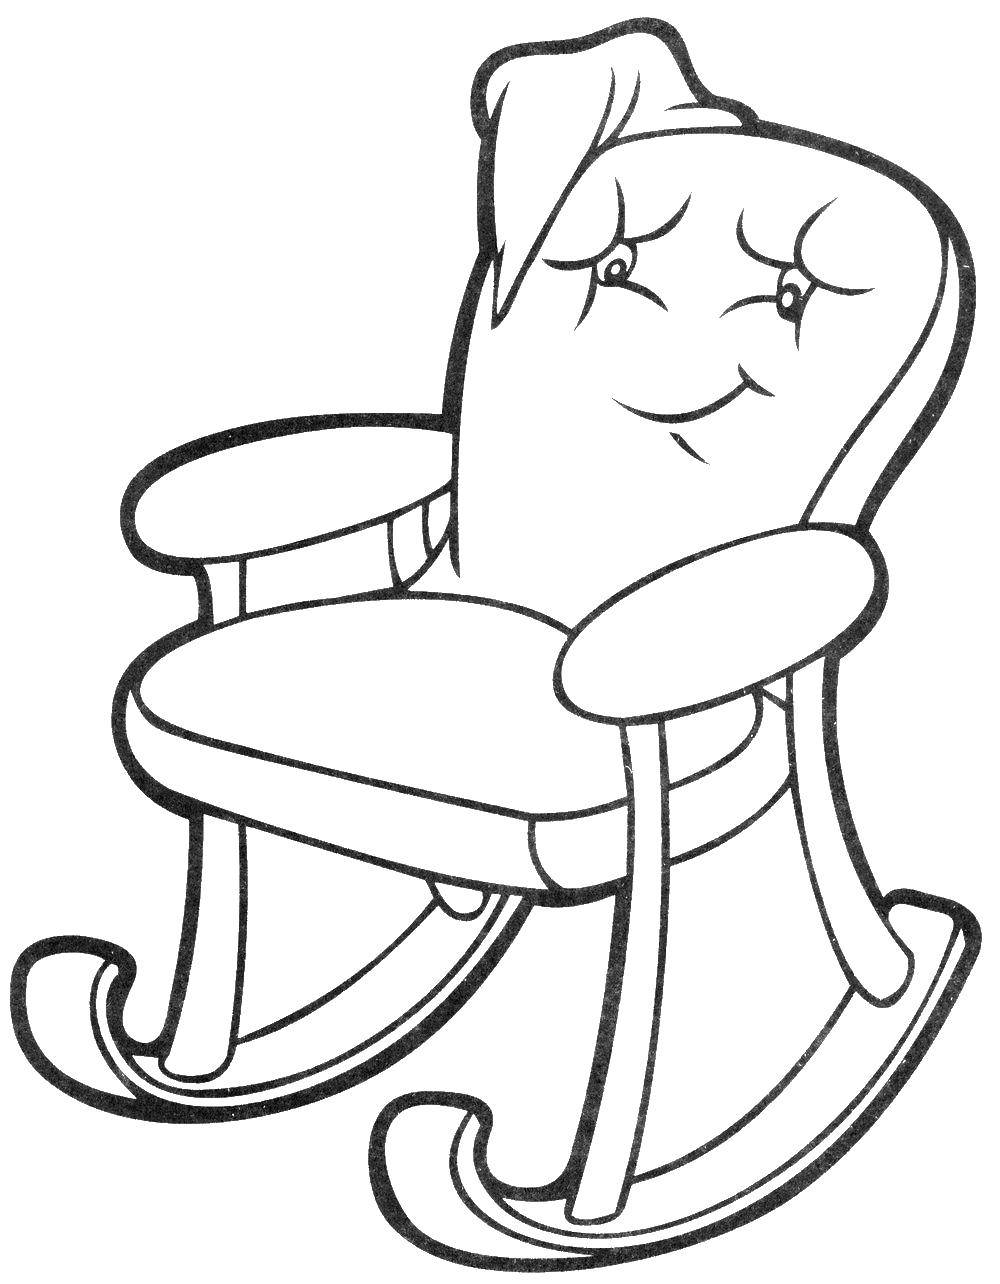 Coloring Rocking chair. Category furniture. Tags:  armchair, chair, furniture.